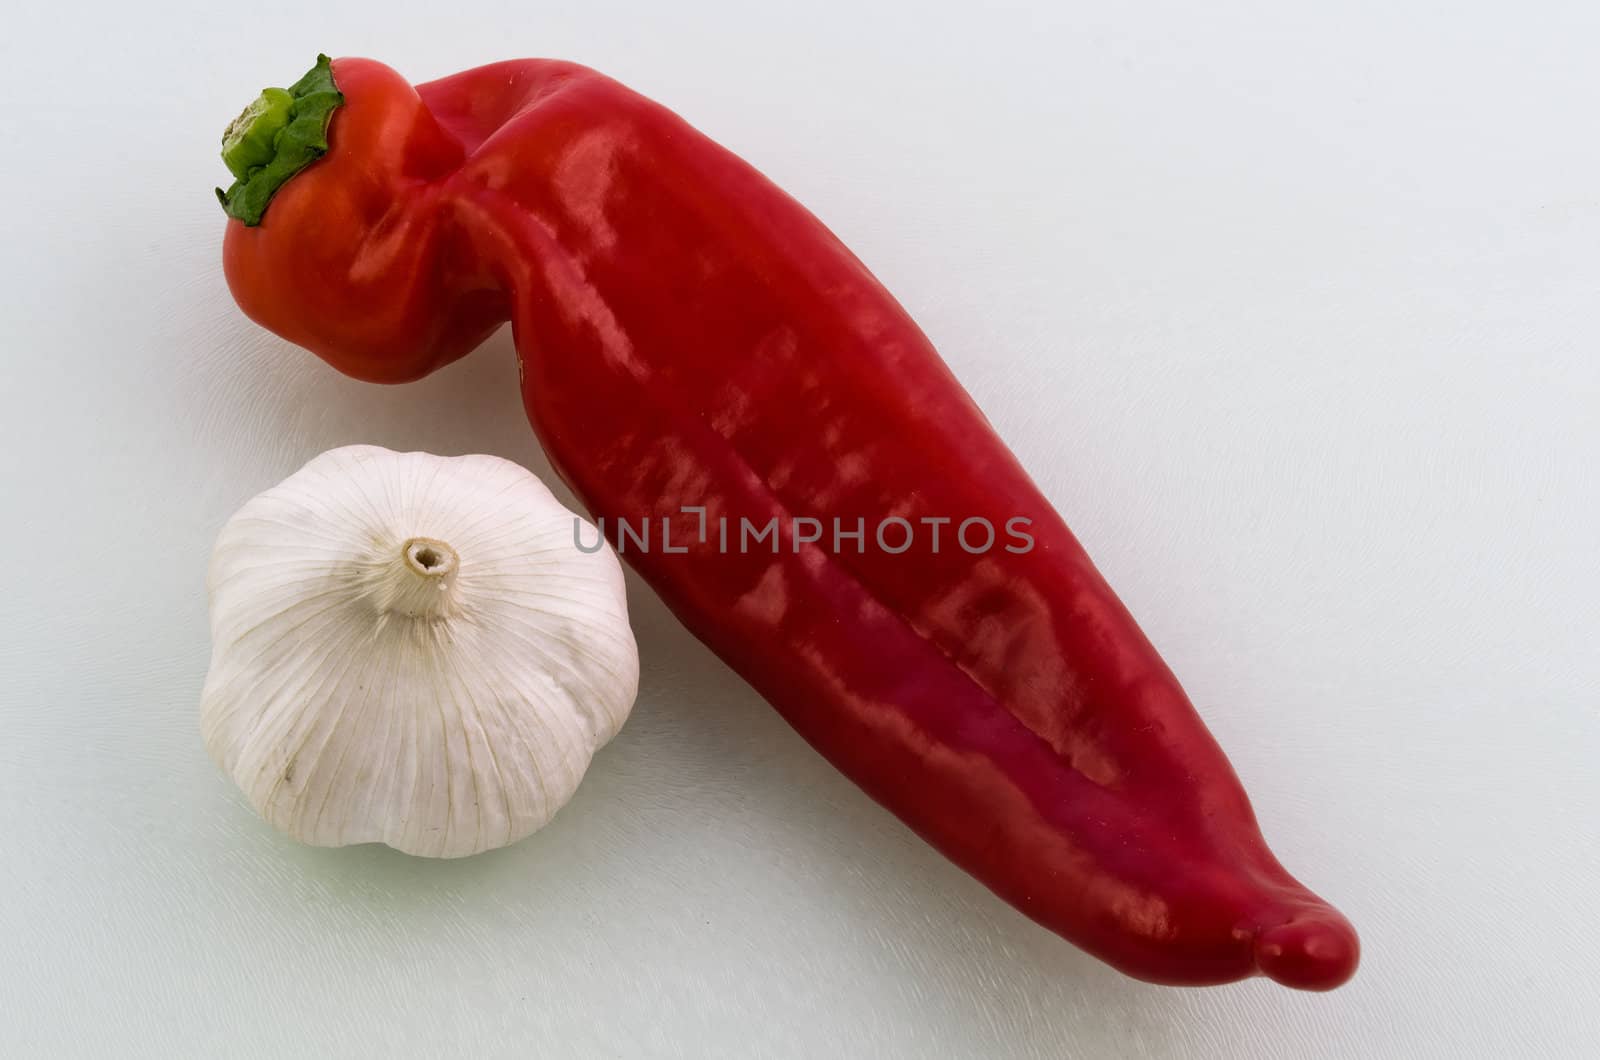 Sweet pointed pepper with garlic by Jez22